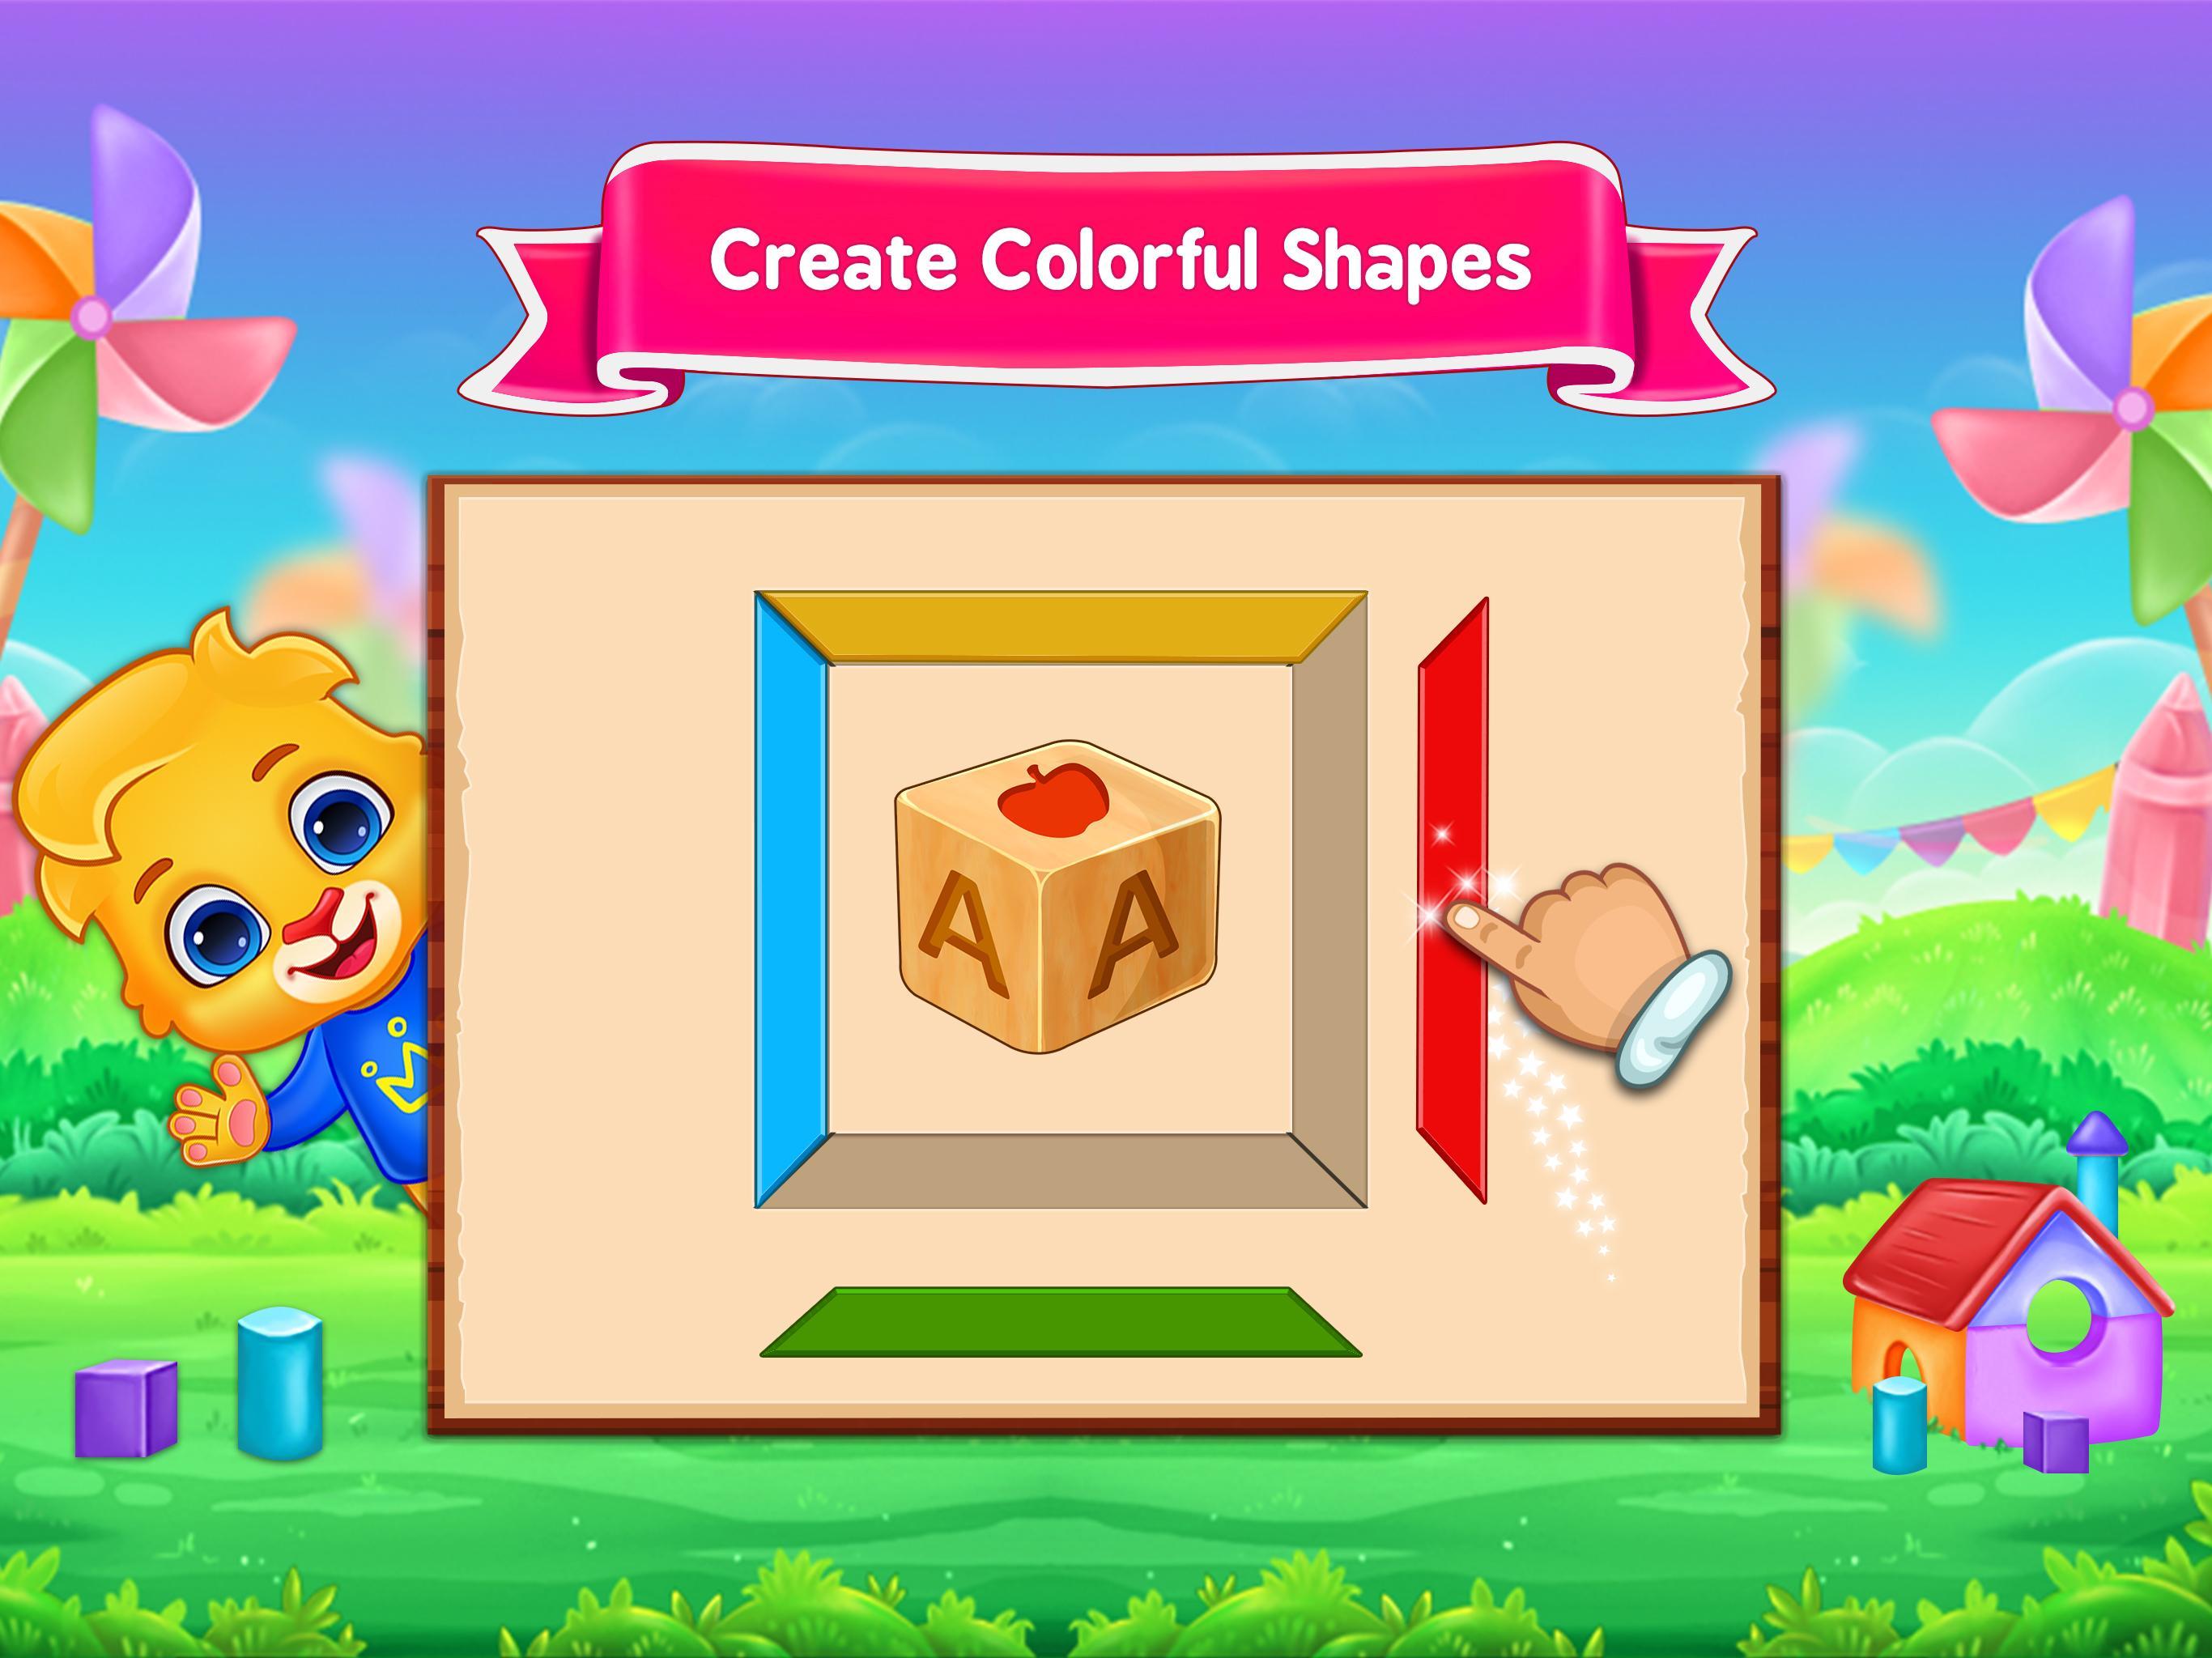 Colors & Shapes - Kids Learn Color and Shape 1.2.5 Screenshot 22